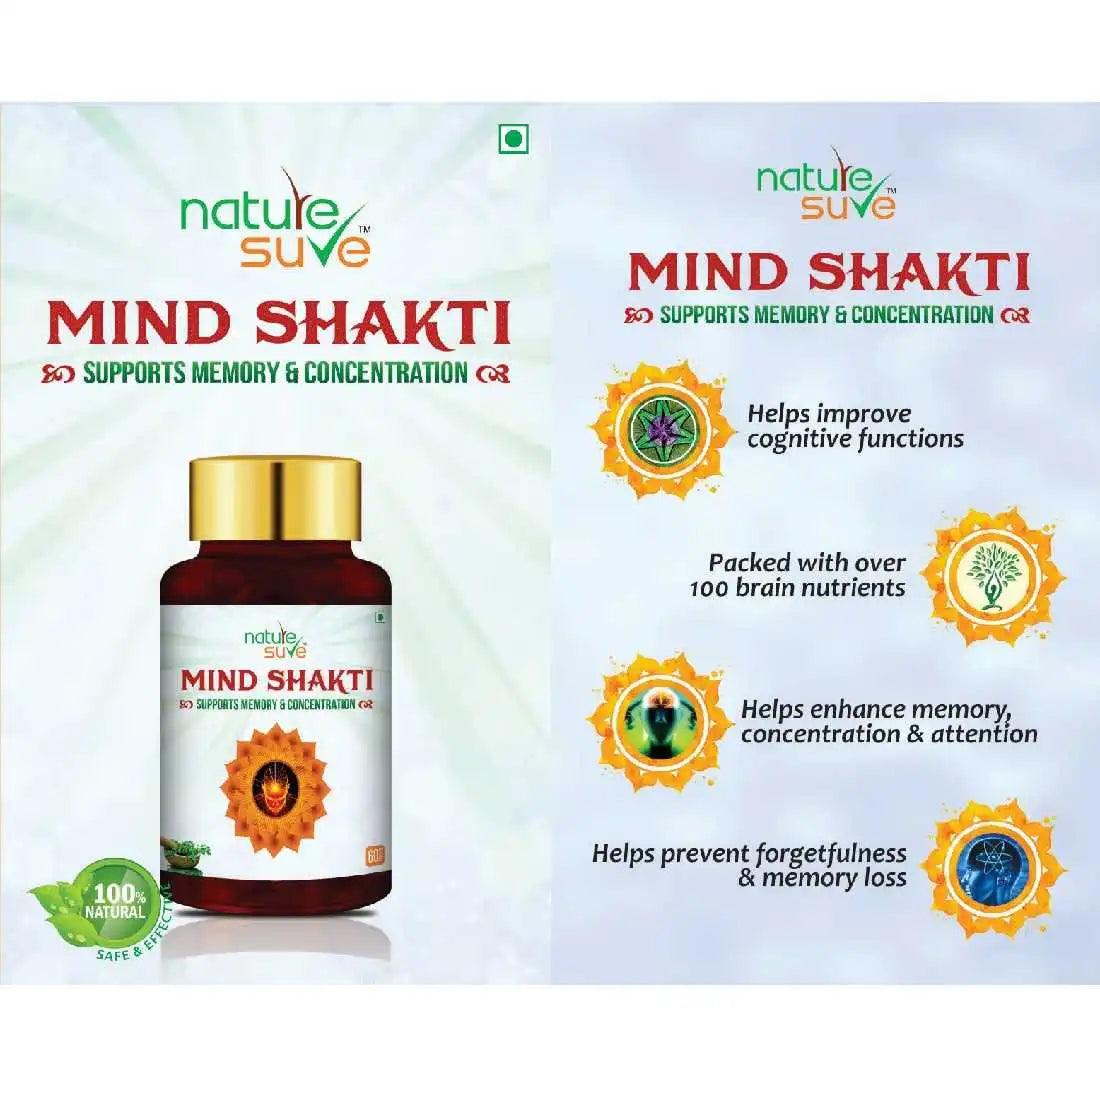 Nature Sure Mind Shakti Tablets for Memory and Concentration help improve cognitive function - everteen-neud.com